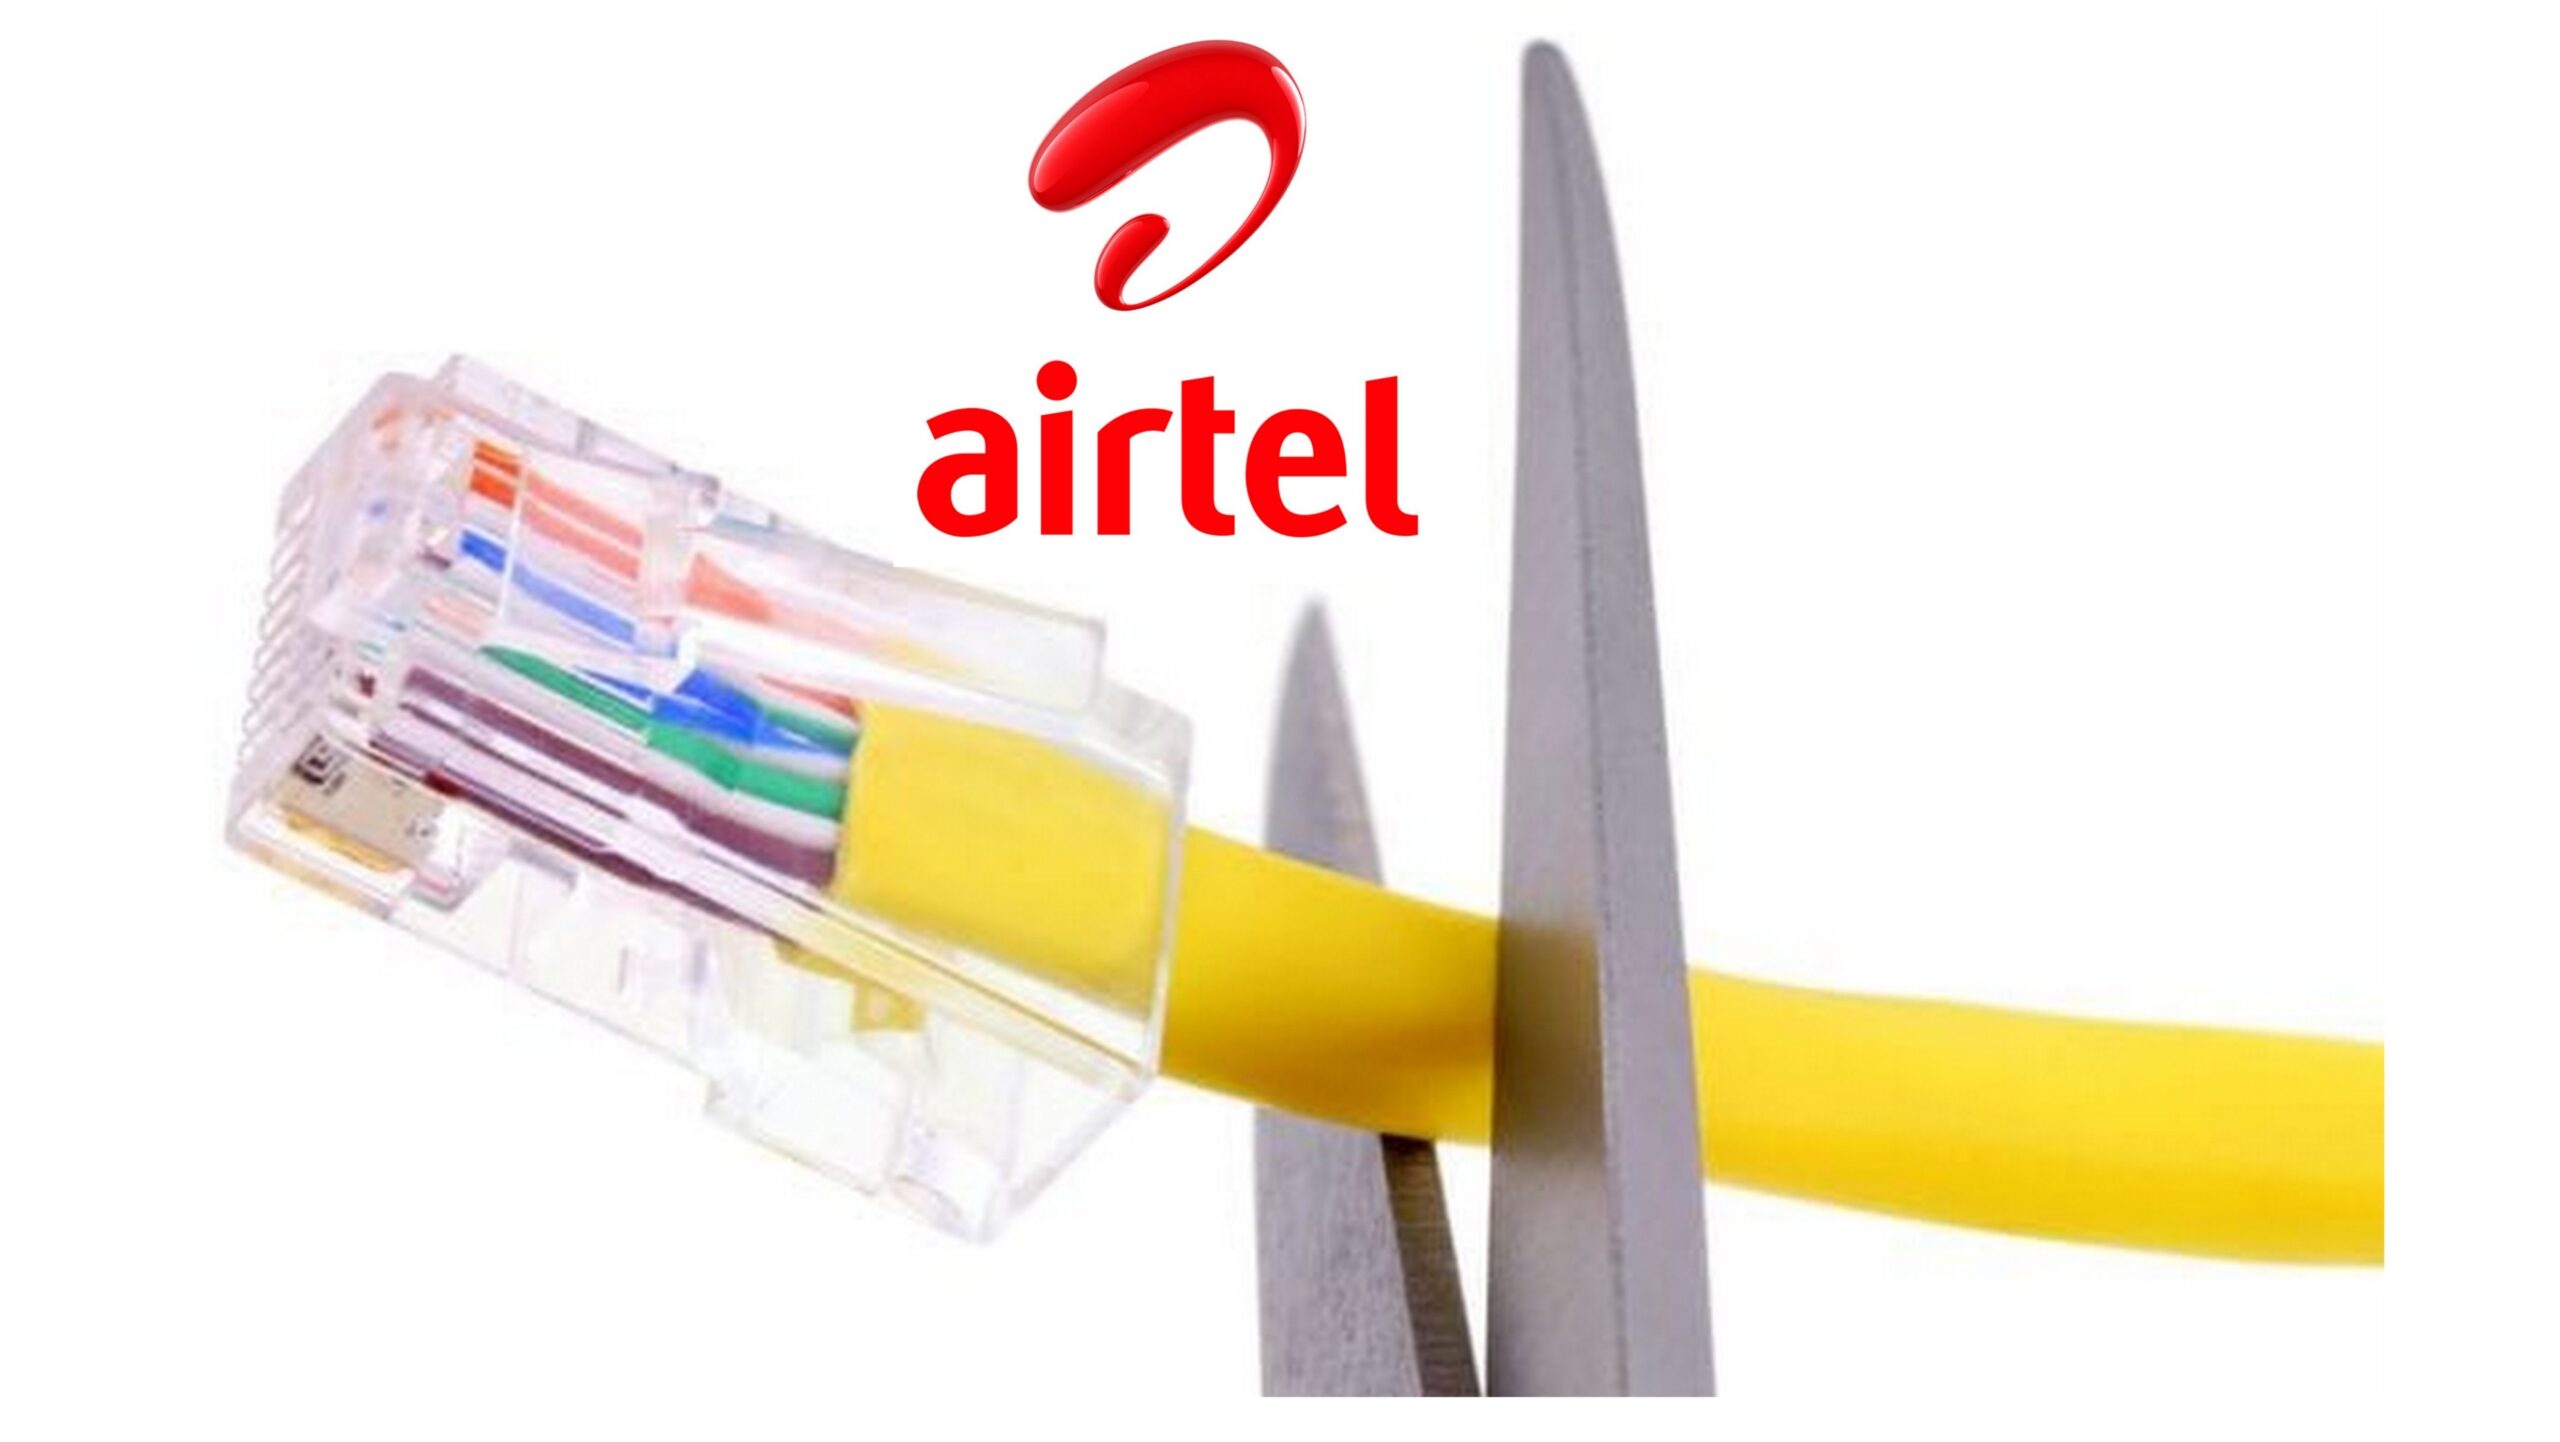 Airtel Network Outage scaled